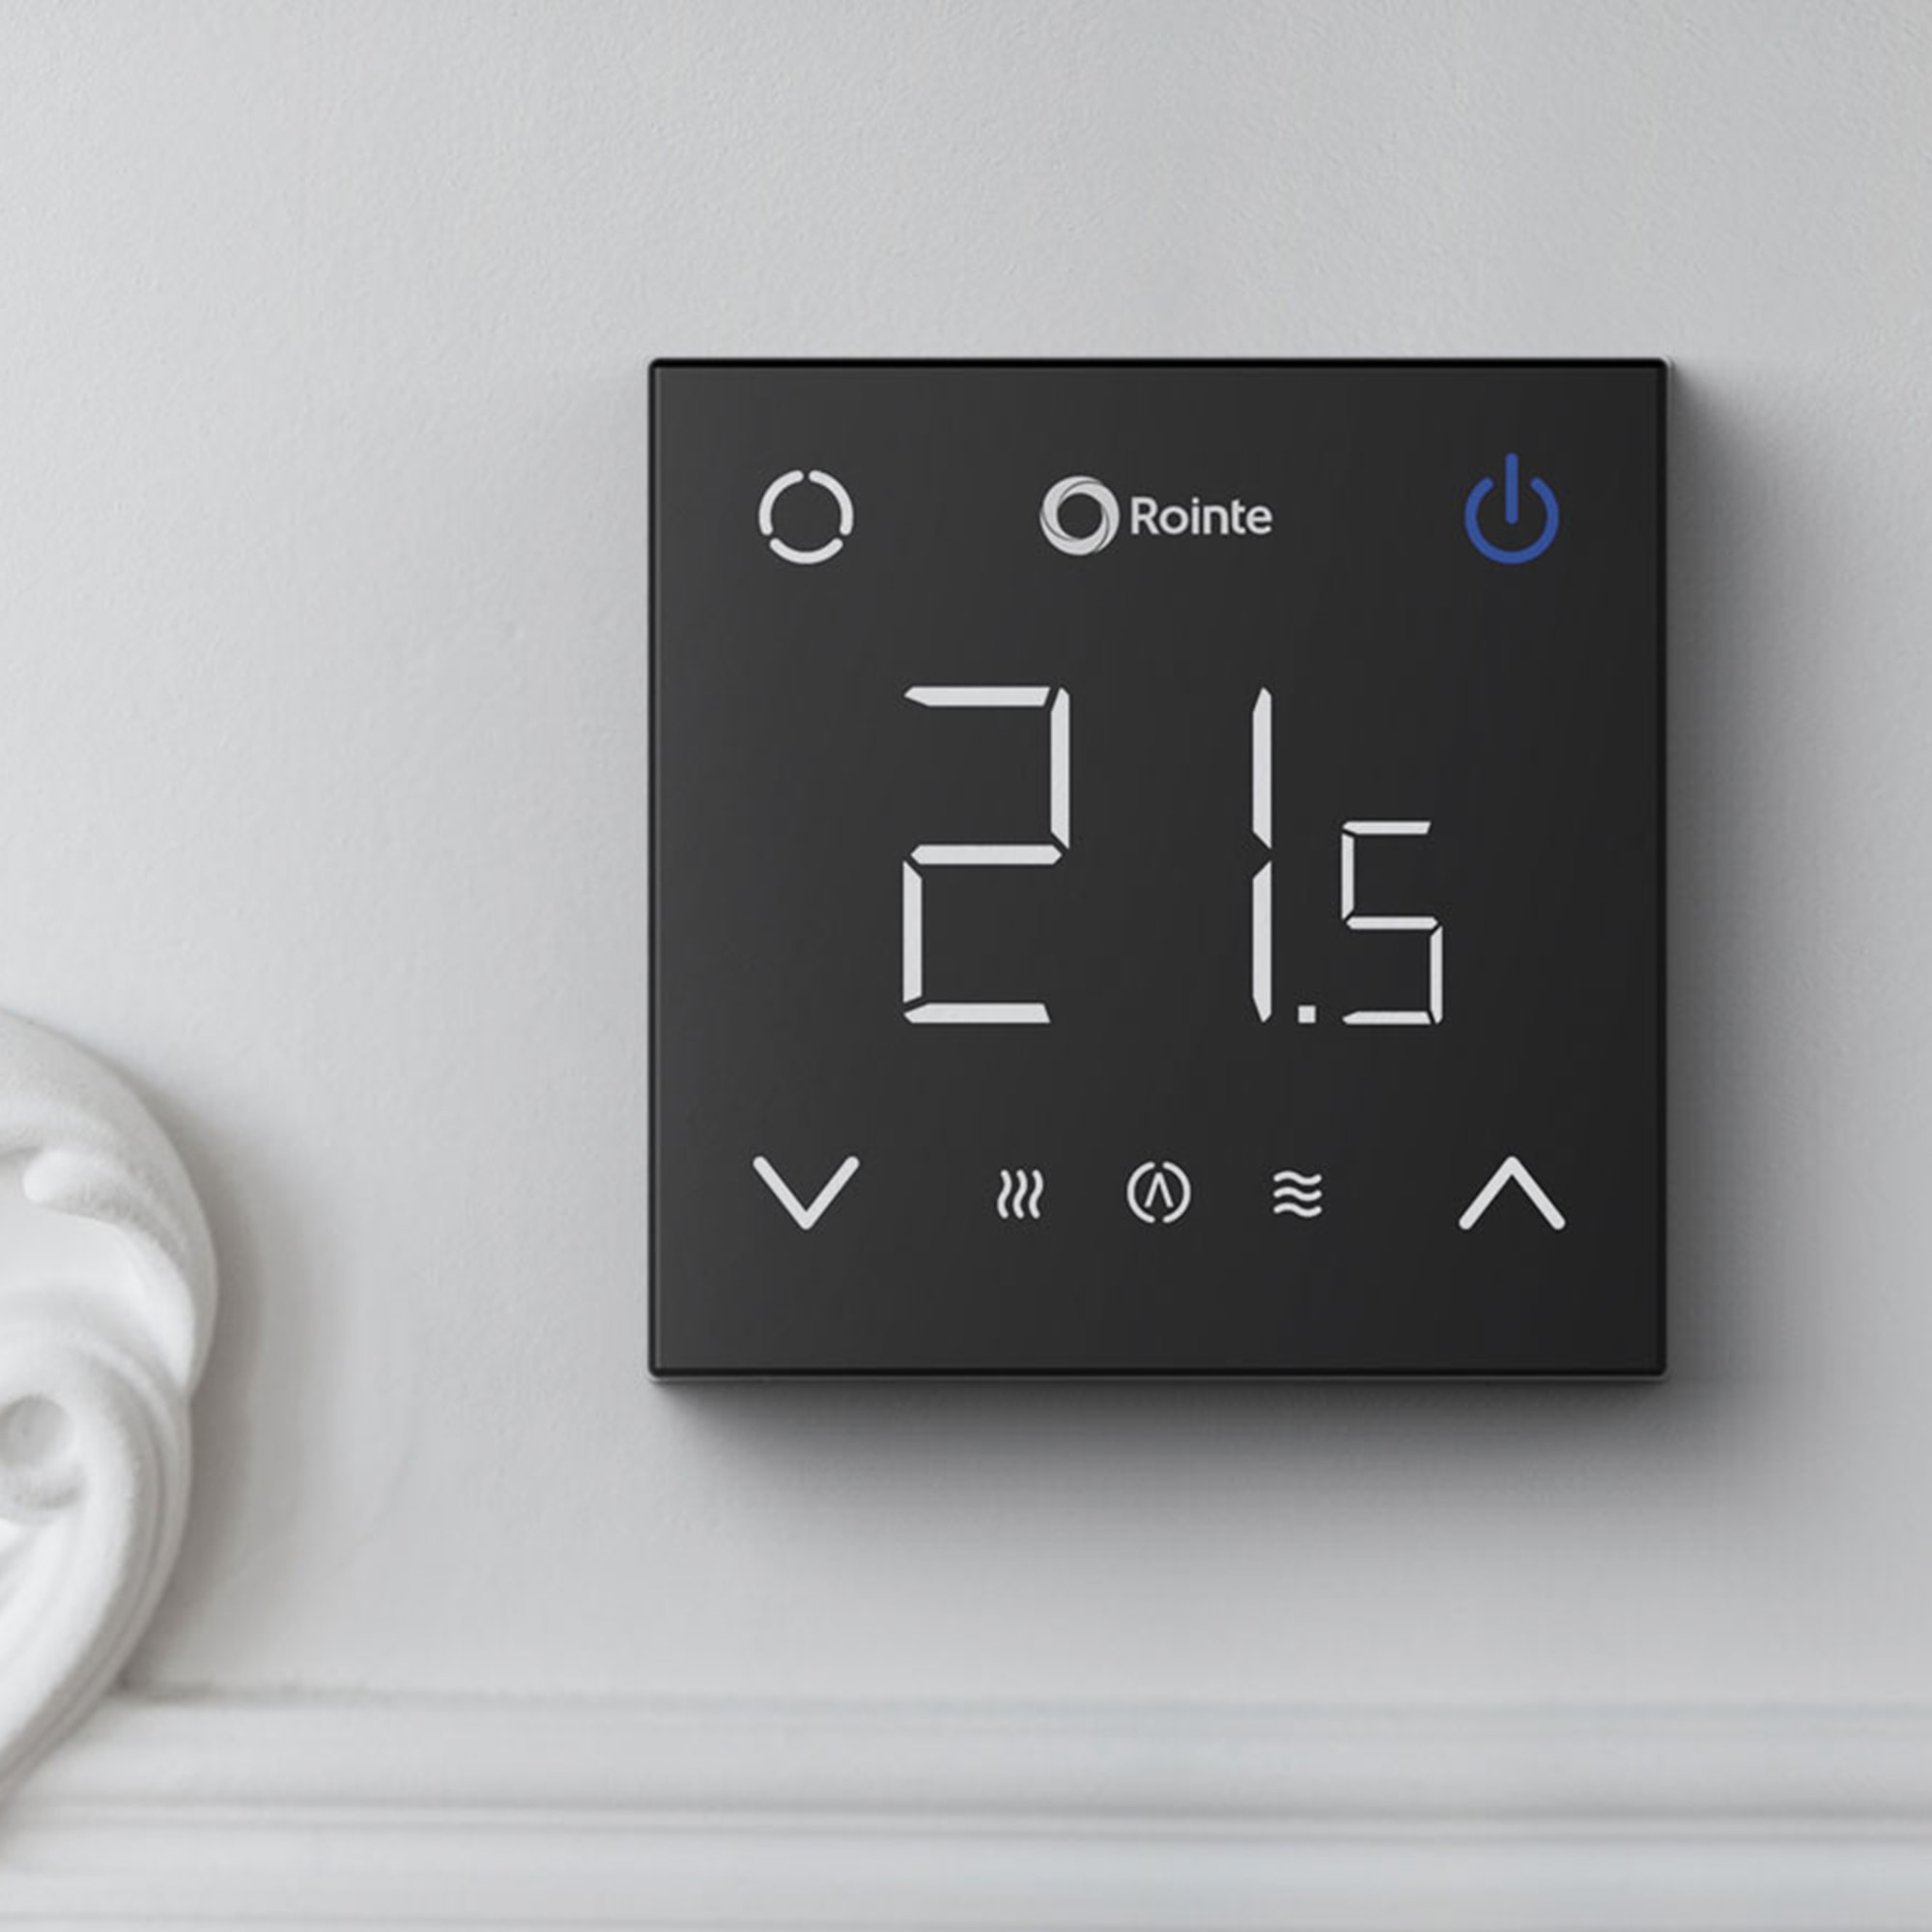 Rointe CT thermostat in black for underfloor heating control